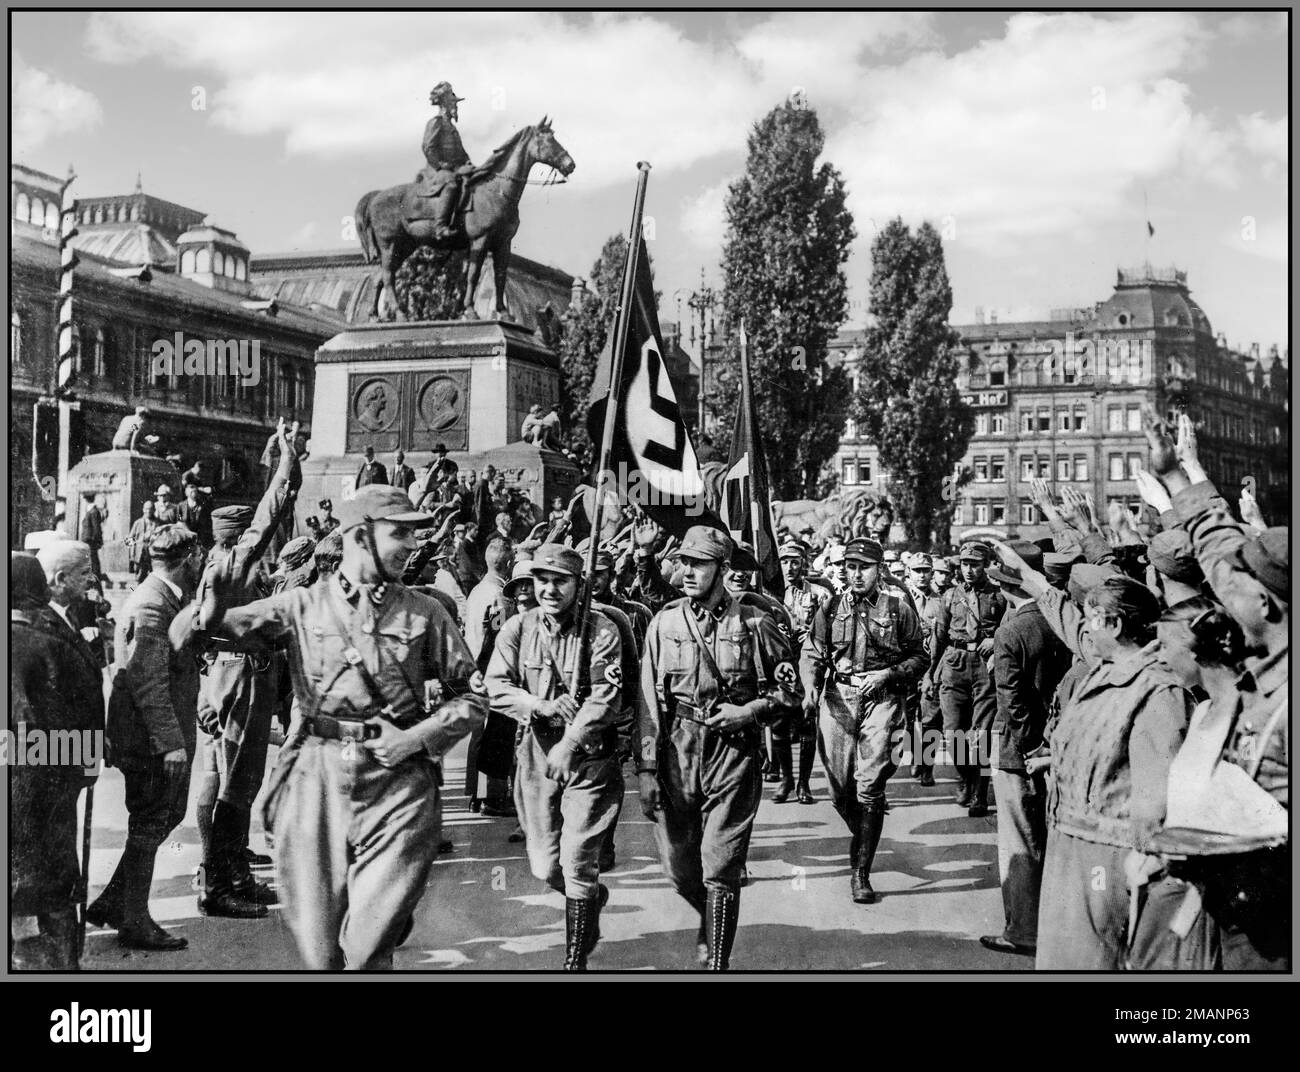 NSDAP; Reichsparteitag; Nürnberg, August 1929 Horst Wessel in his Sturmführer uniform leading an Sturmabteilung (SA) unit at a Nazi Party rally in Nuremberg, Germany, in August 1929; in front of the main railway station (Hauptbahnhof) Horst Wessel (1907 – 1930) was a German Nazi activist who was made a posthumous hero of the Nazi movement following his violent death in 1930 Nazi Germany Stock Photo